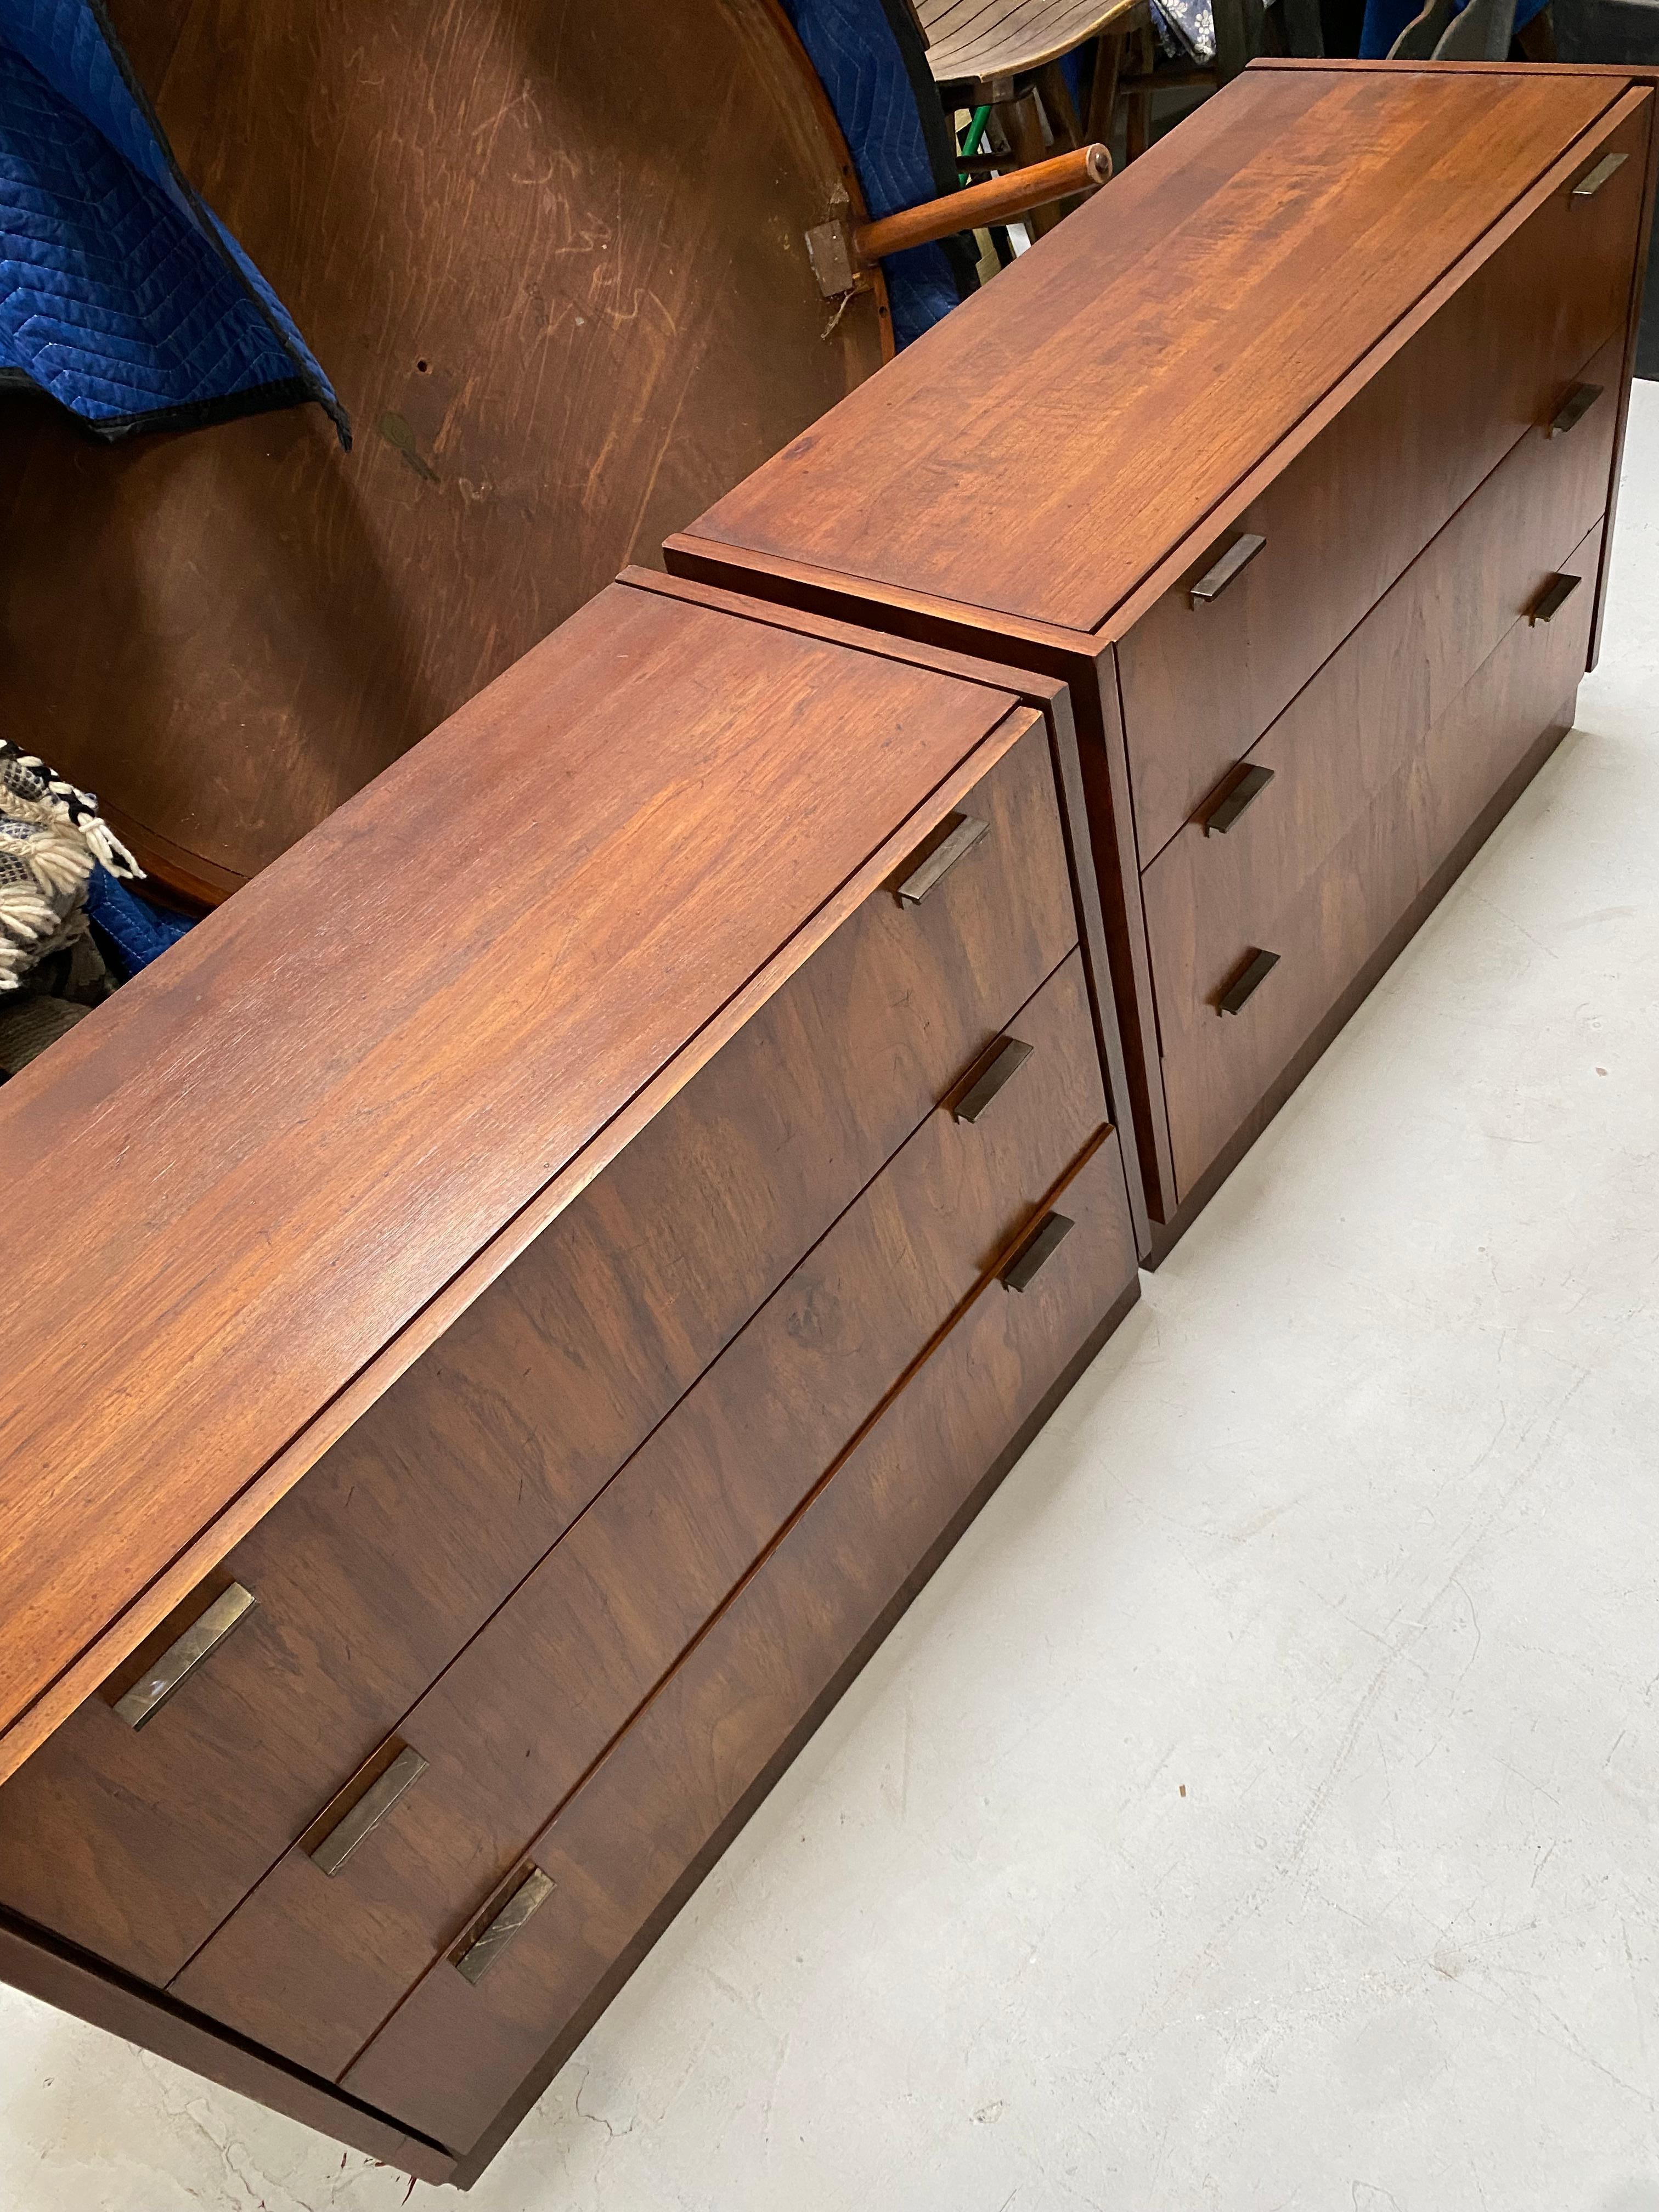 Amazing Mid-Century Modern dressers with metal hardware and beautiful dark stained wood. The perfect pair of dressers to bring a sleek modern look into your home!